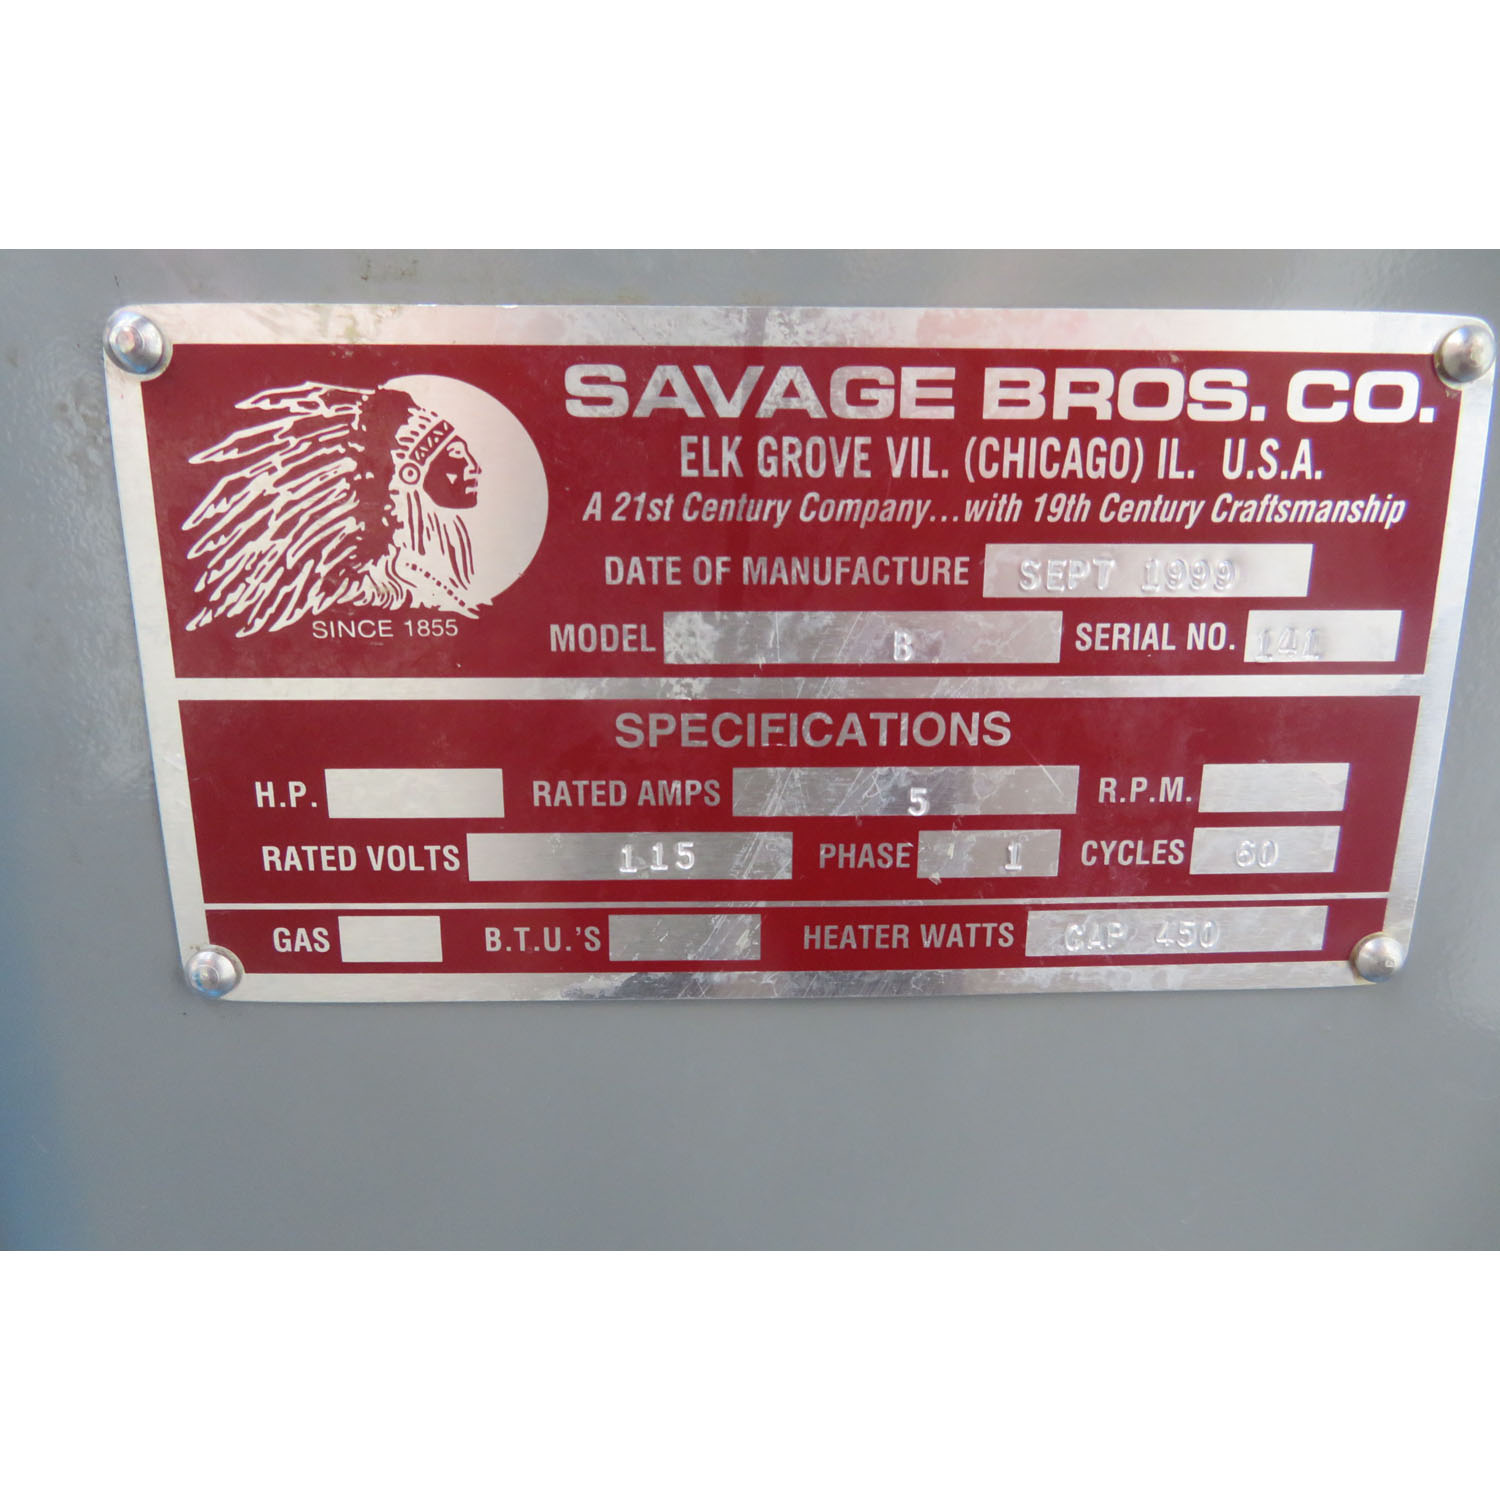 Savage Bros Model B LifTILTruk Bowl Lifter, Used Excellent Condition image 4